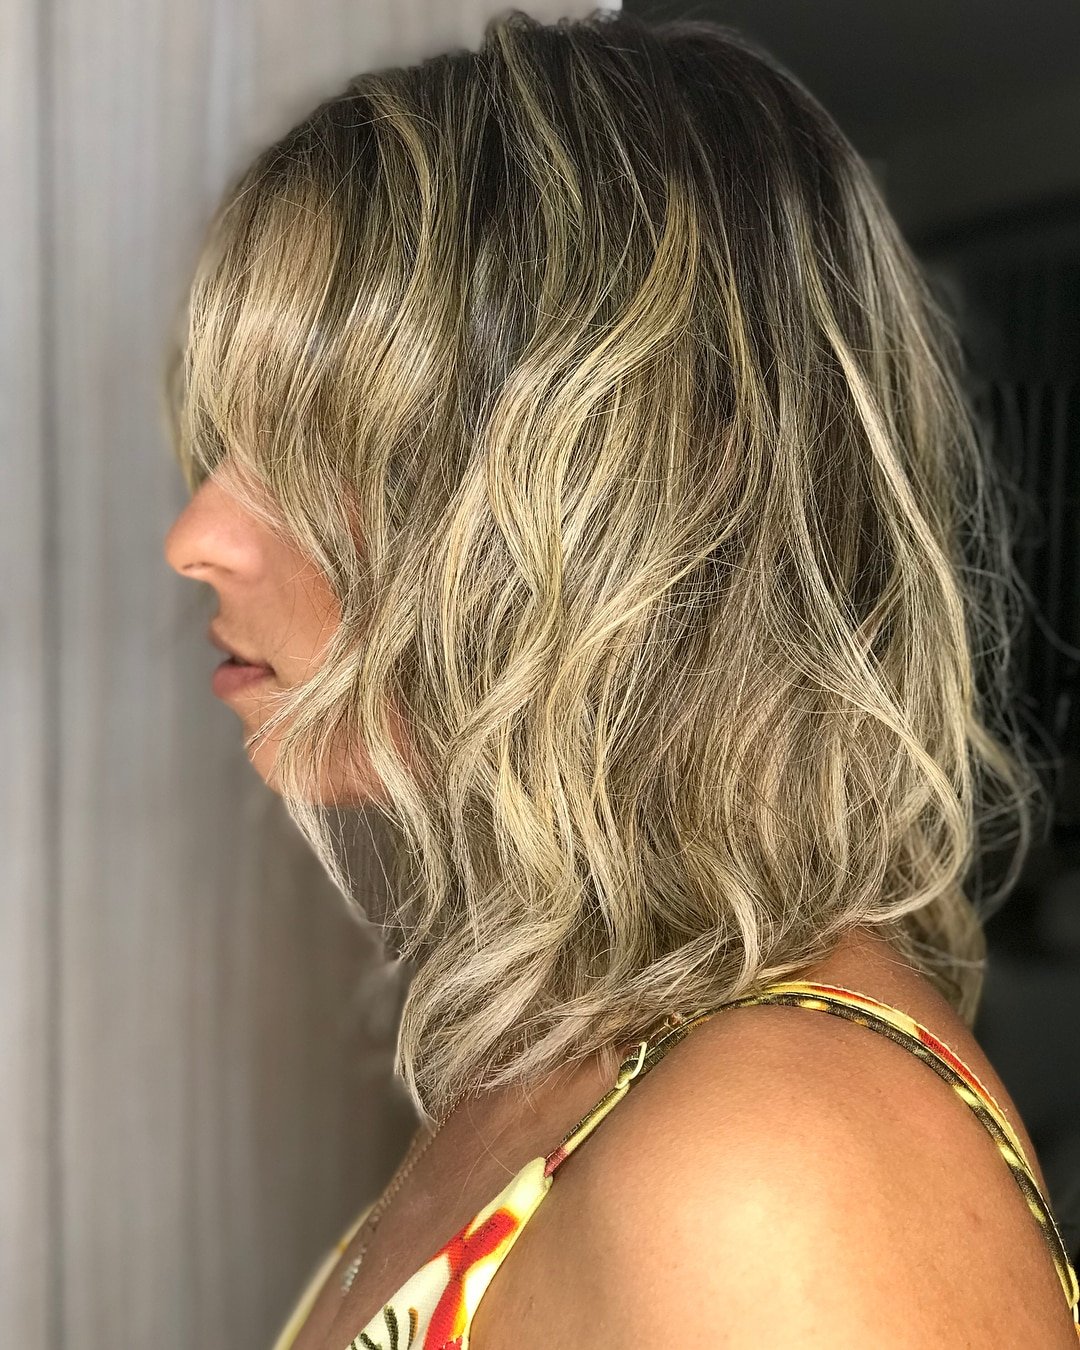 Shoulder-Grazing Cut for Thick Beachy Waves